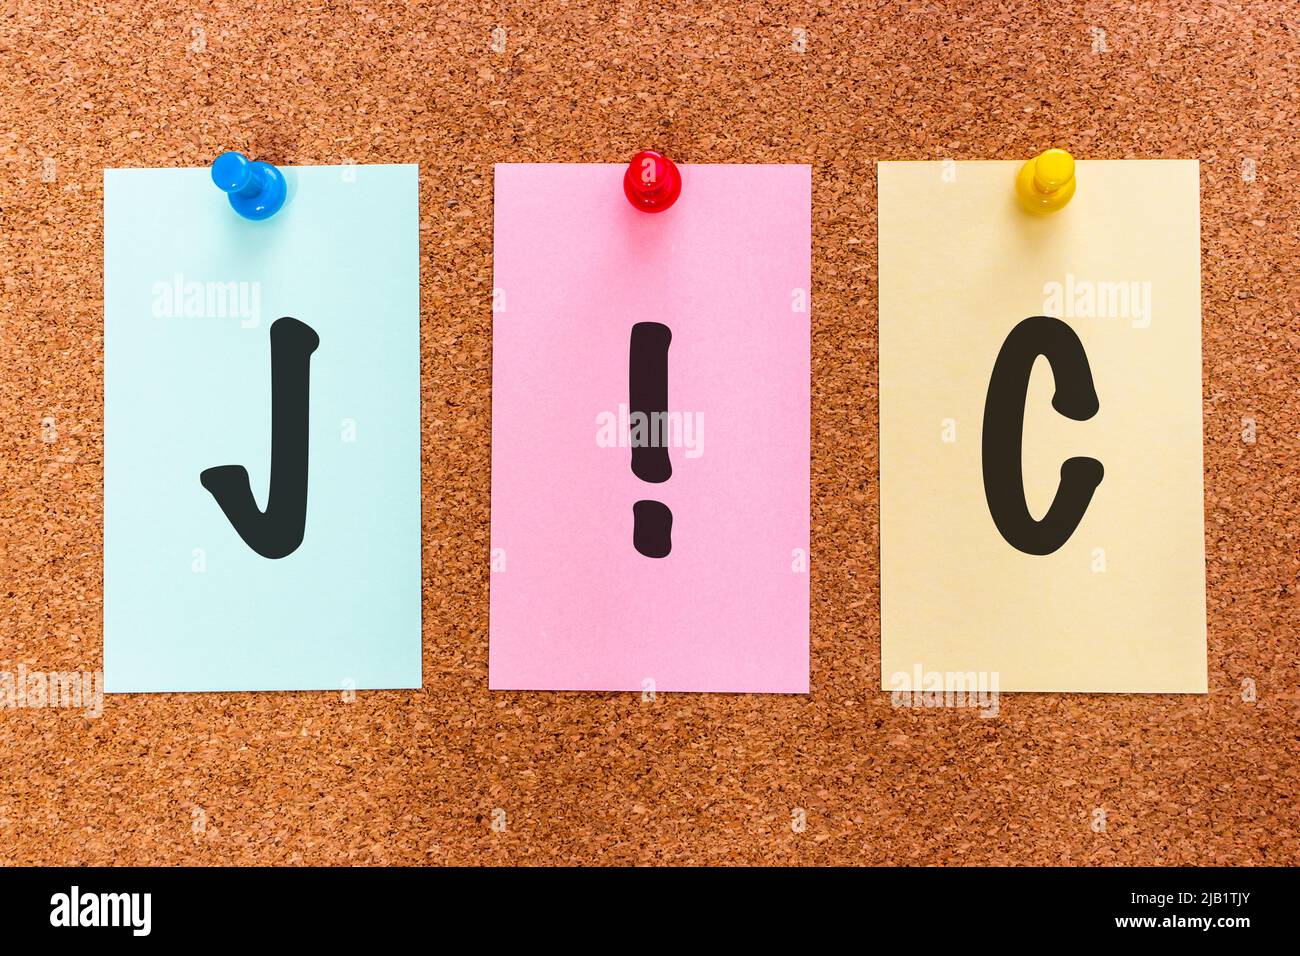 Conceptual 3 letter acronym abbreviation JIC (Just In Case) on multicolored stickers attached to a cork board. Stock Photo